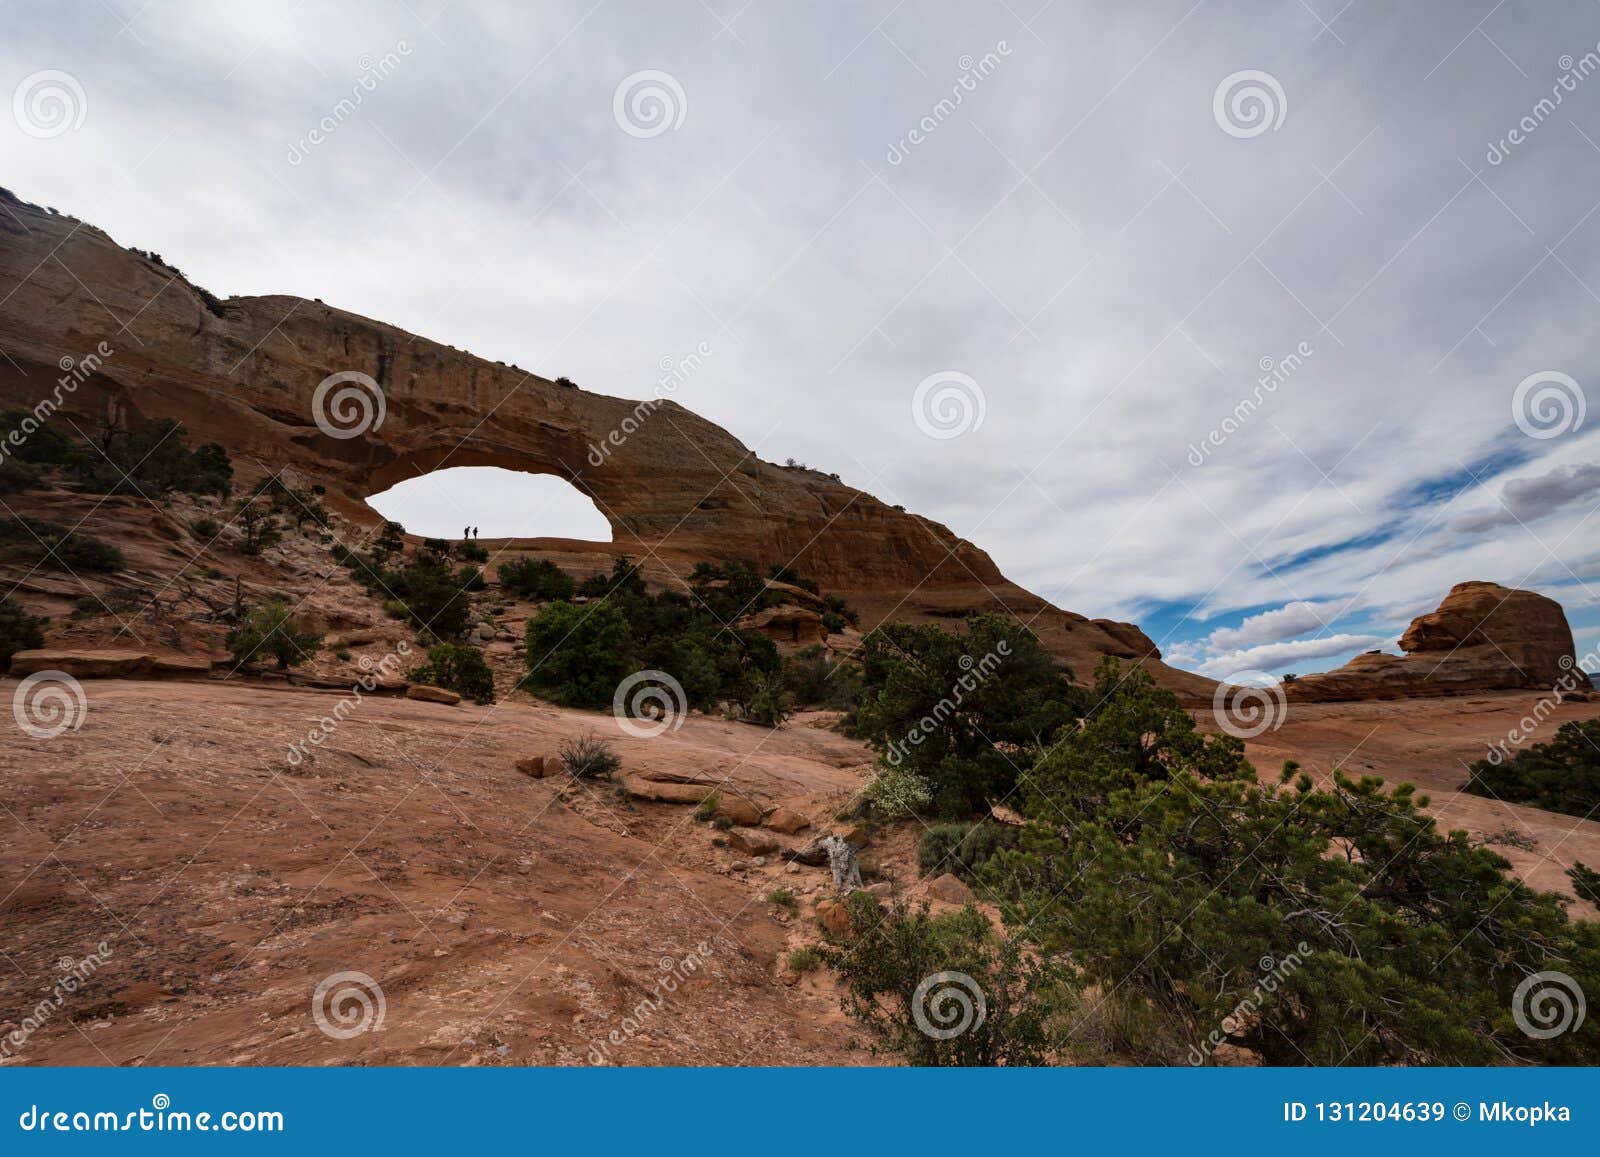 wilson arch, located in dry valley utah, is an entrada standstone